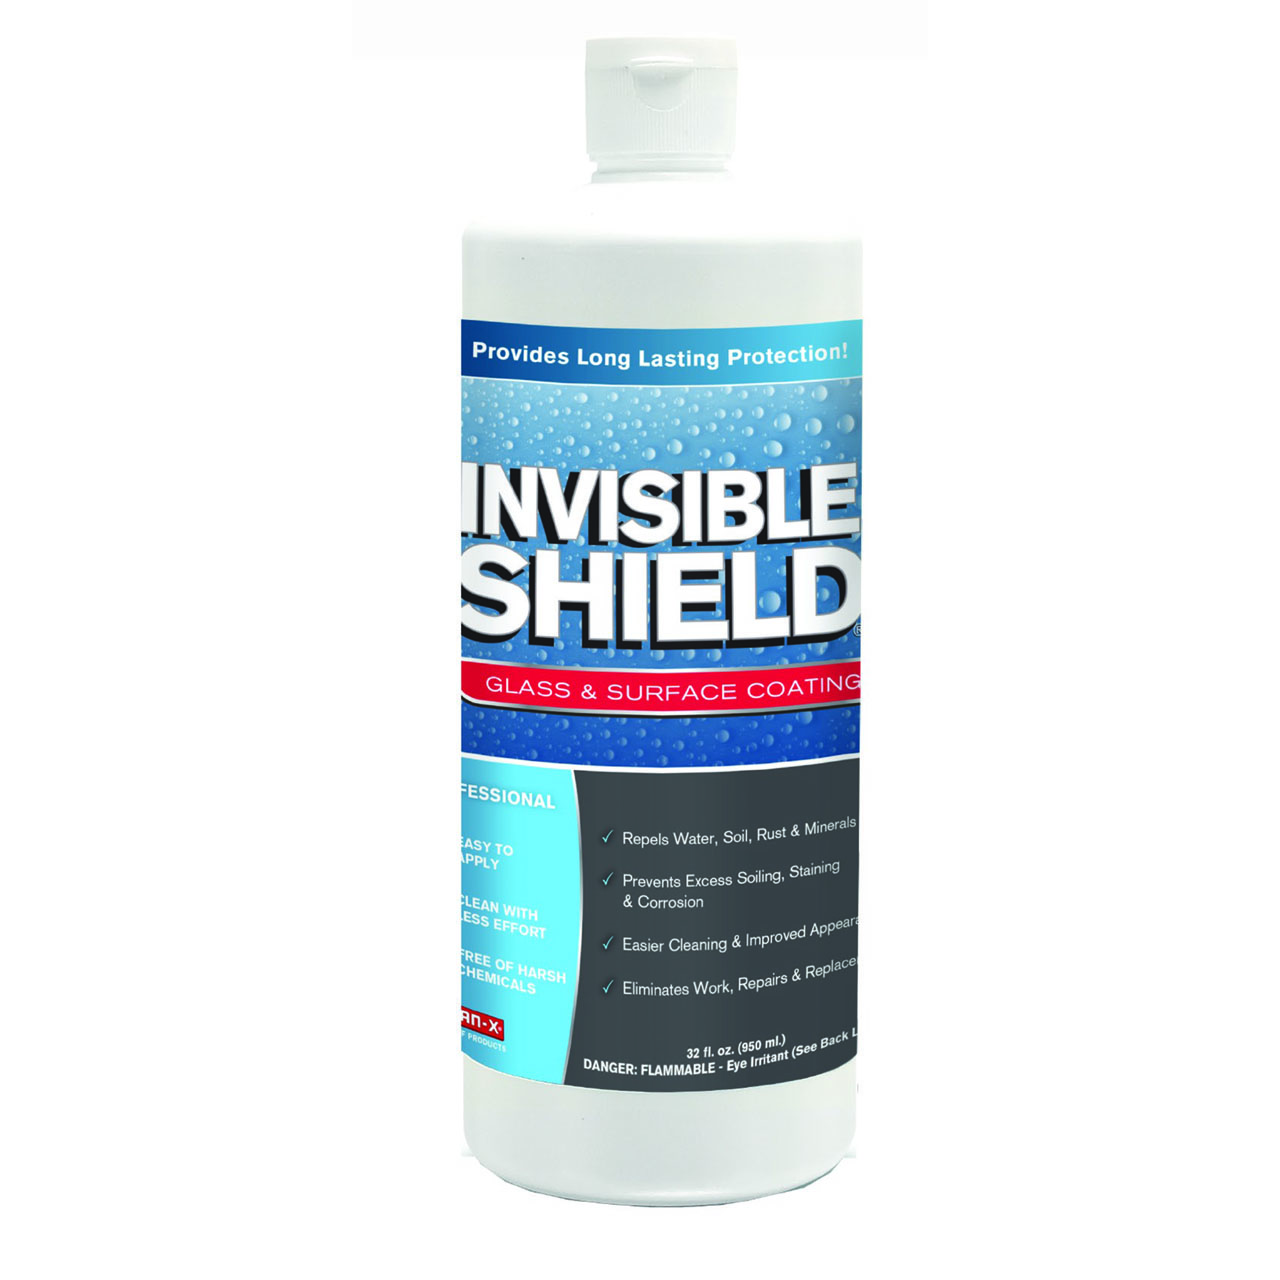 INVISIBLE SHIELD® Glass & surface coating 946ml